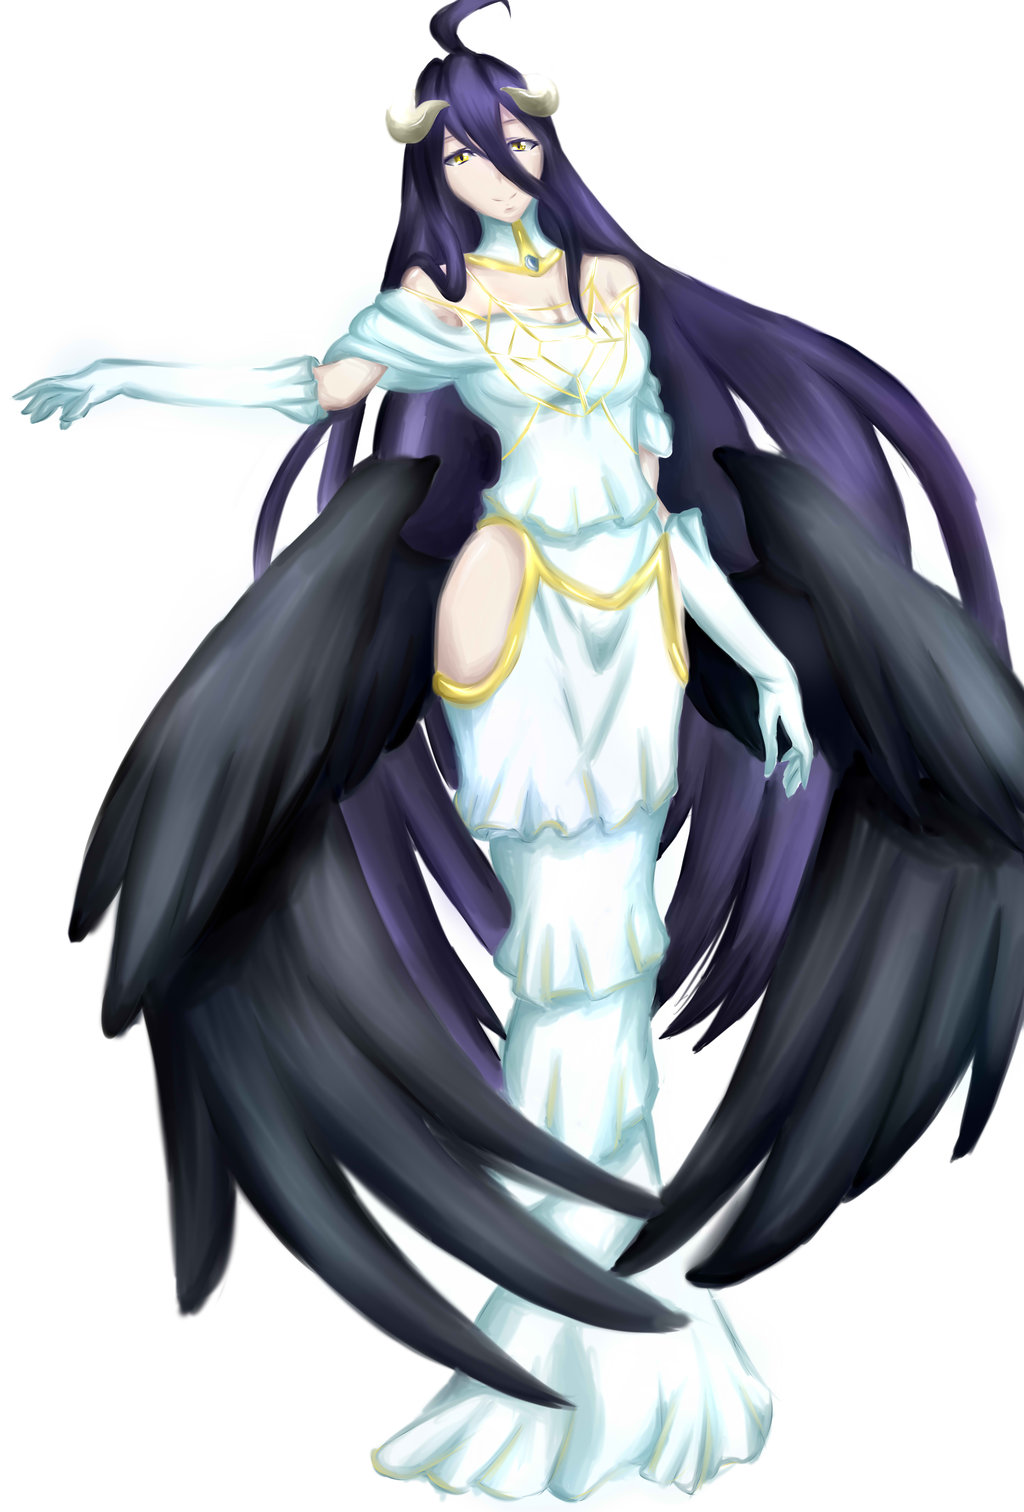 Albedo Overlord Part Link On The Descripition By Suikii